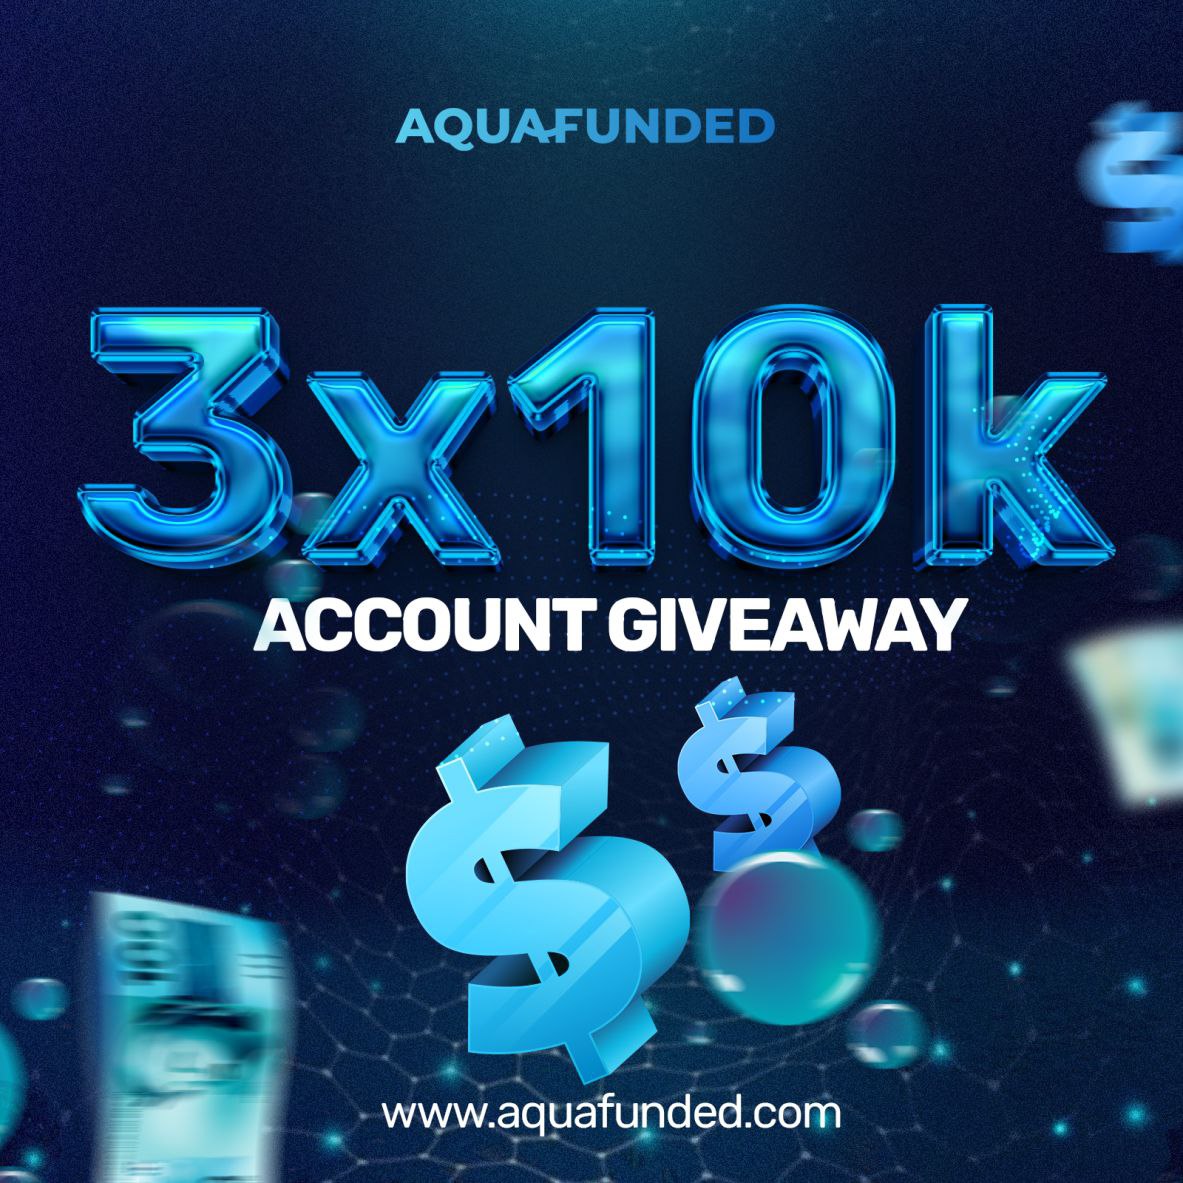 🎁 𝟯 𝘅 $𝟭𝟬𝗸 𝗔𝗖𝗖𝗢𝗨𝗡𝗧 𝗚𝗜𝗩𝗘𝗔𝗪𝗔𝗬! 🎁

𝗧𝗼  𝗘𝗻𝘁𝗲𝗿:👇

1️⃣ FOLLOW ✅
@TraderZed8 
@AquaFunded 
SUBCRIBE: ✅
youtube.com/channel/UCY_xi…

2️⃣ LIKE AND REPOST 🔁

3️⃣ TAG 3 TRADER FRIENDS! 🙎‍♂️

Winners will be announced in 4 Days!